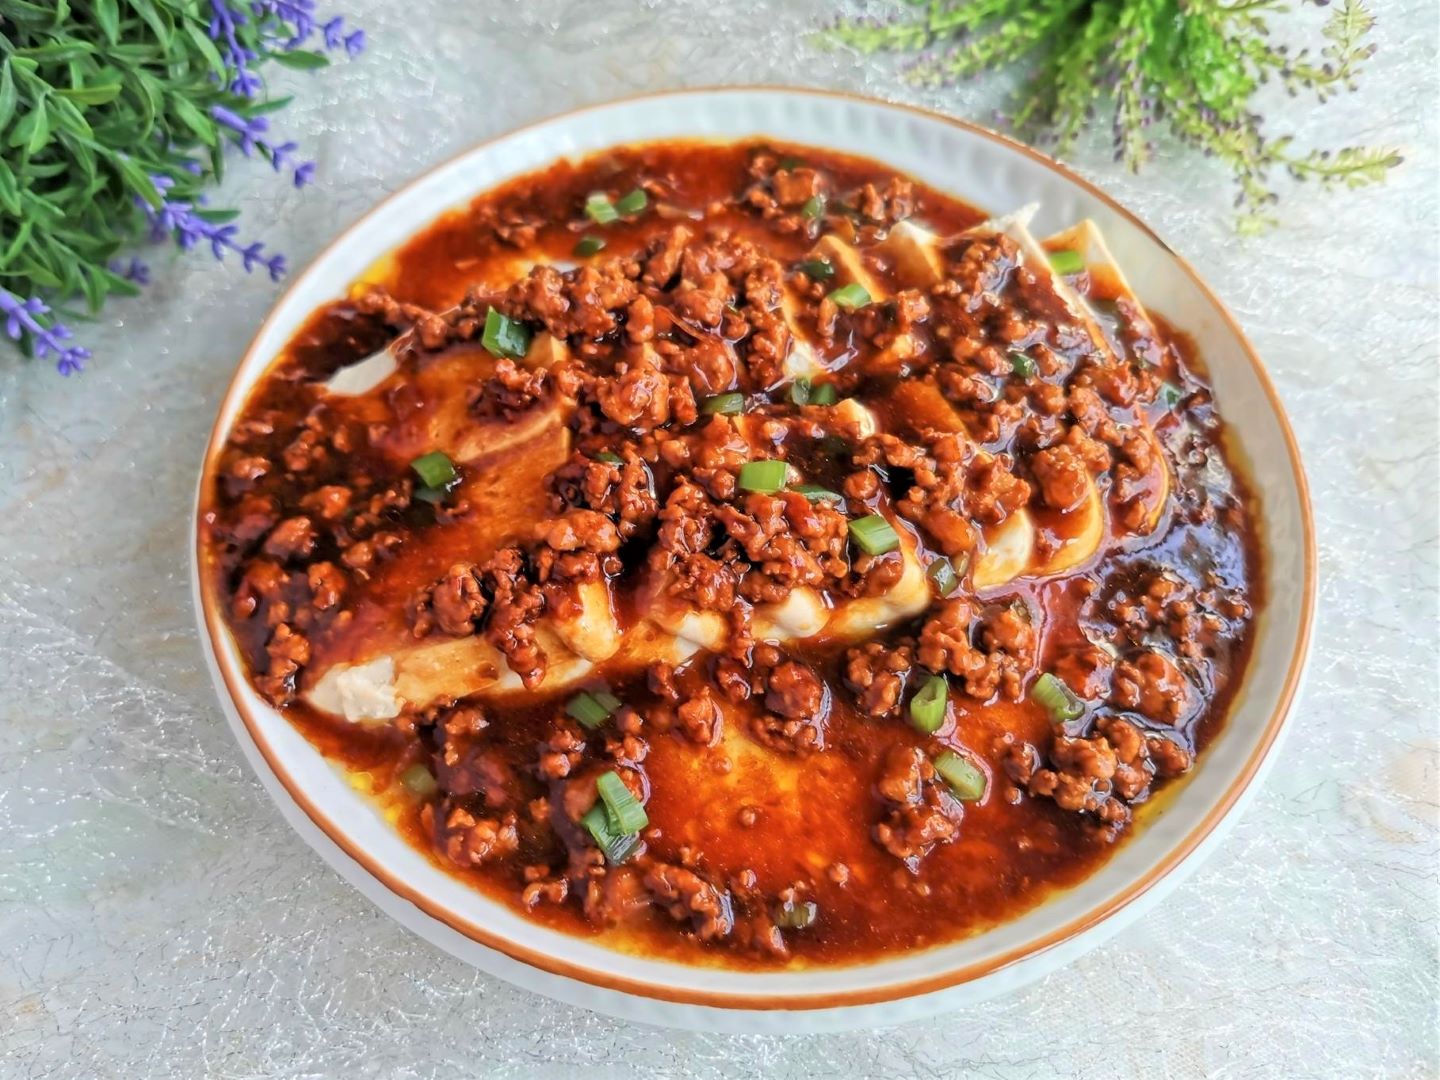 Steamed tofu and egg in minced meat sauce